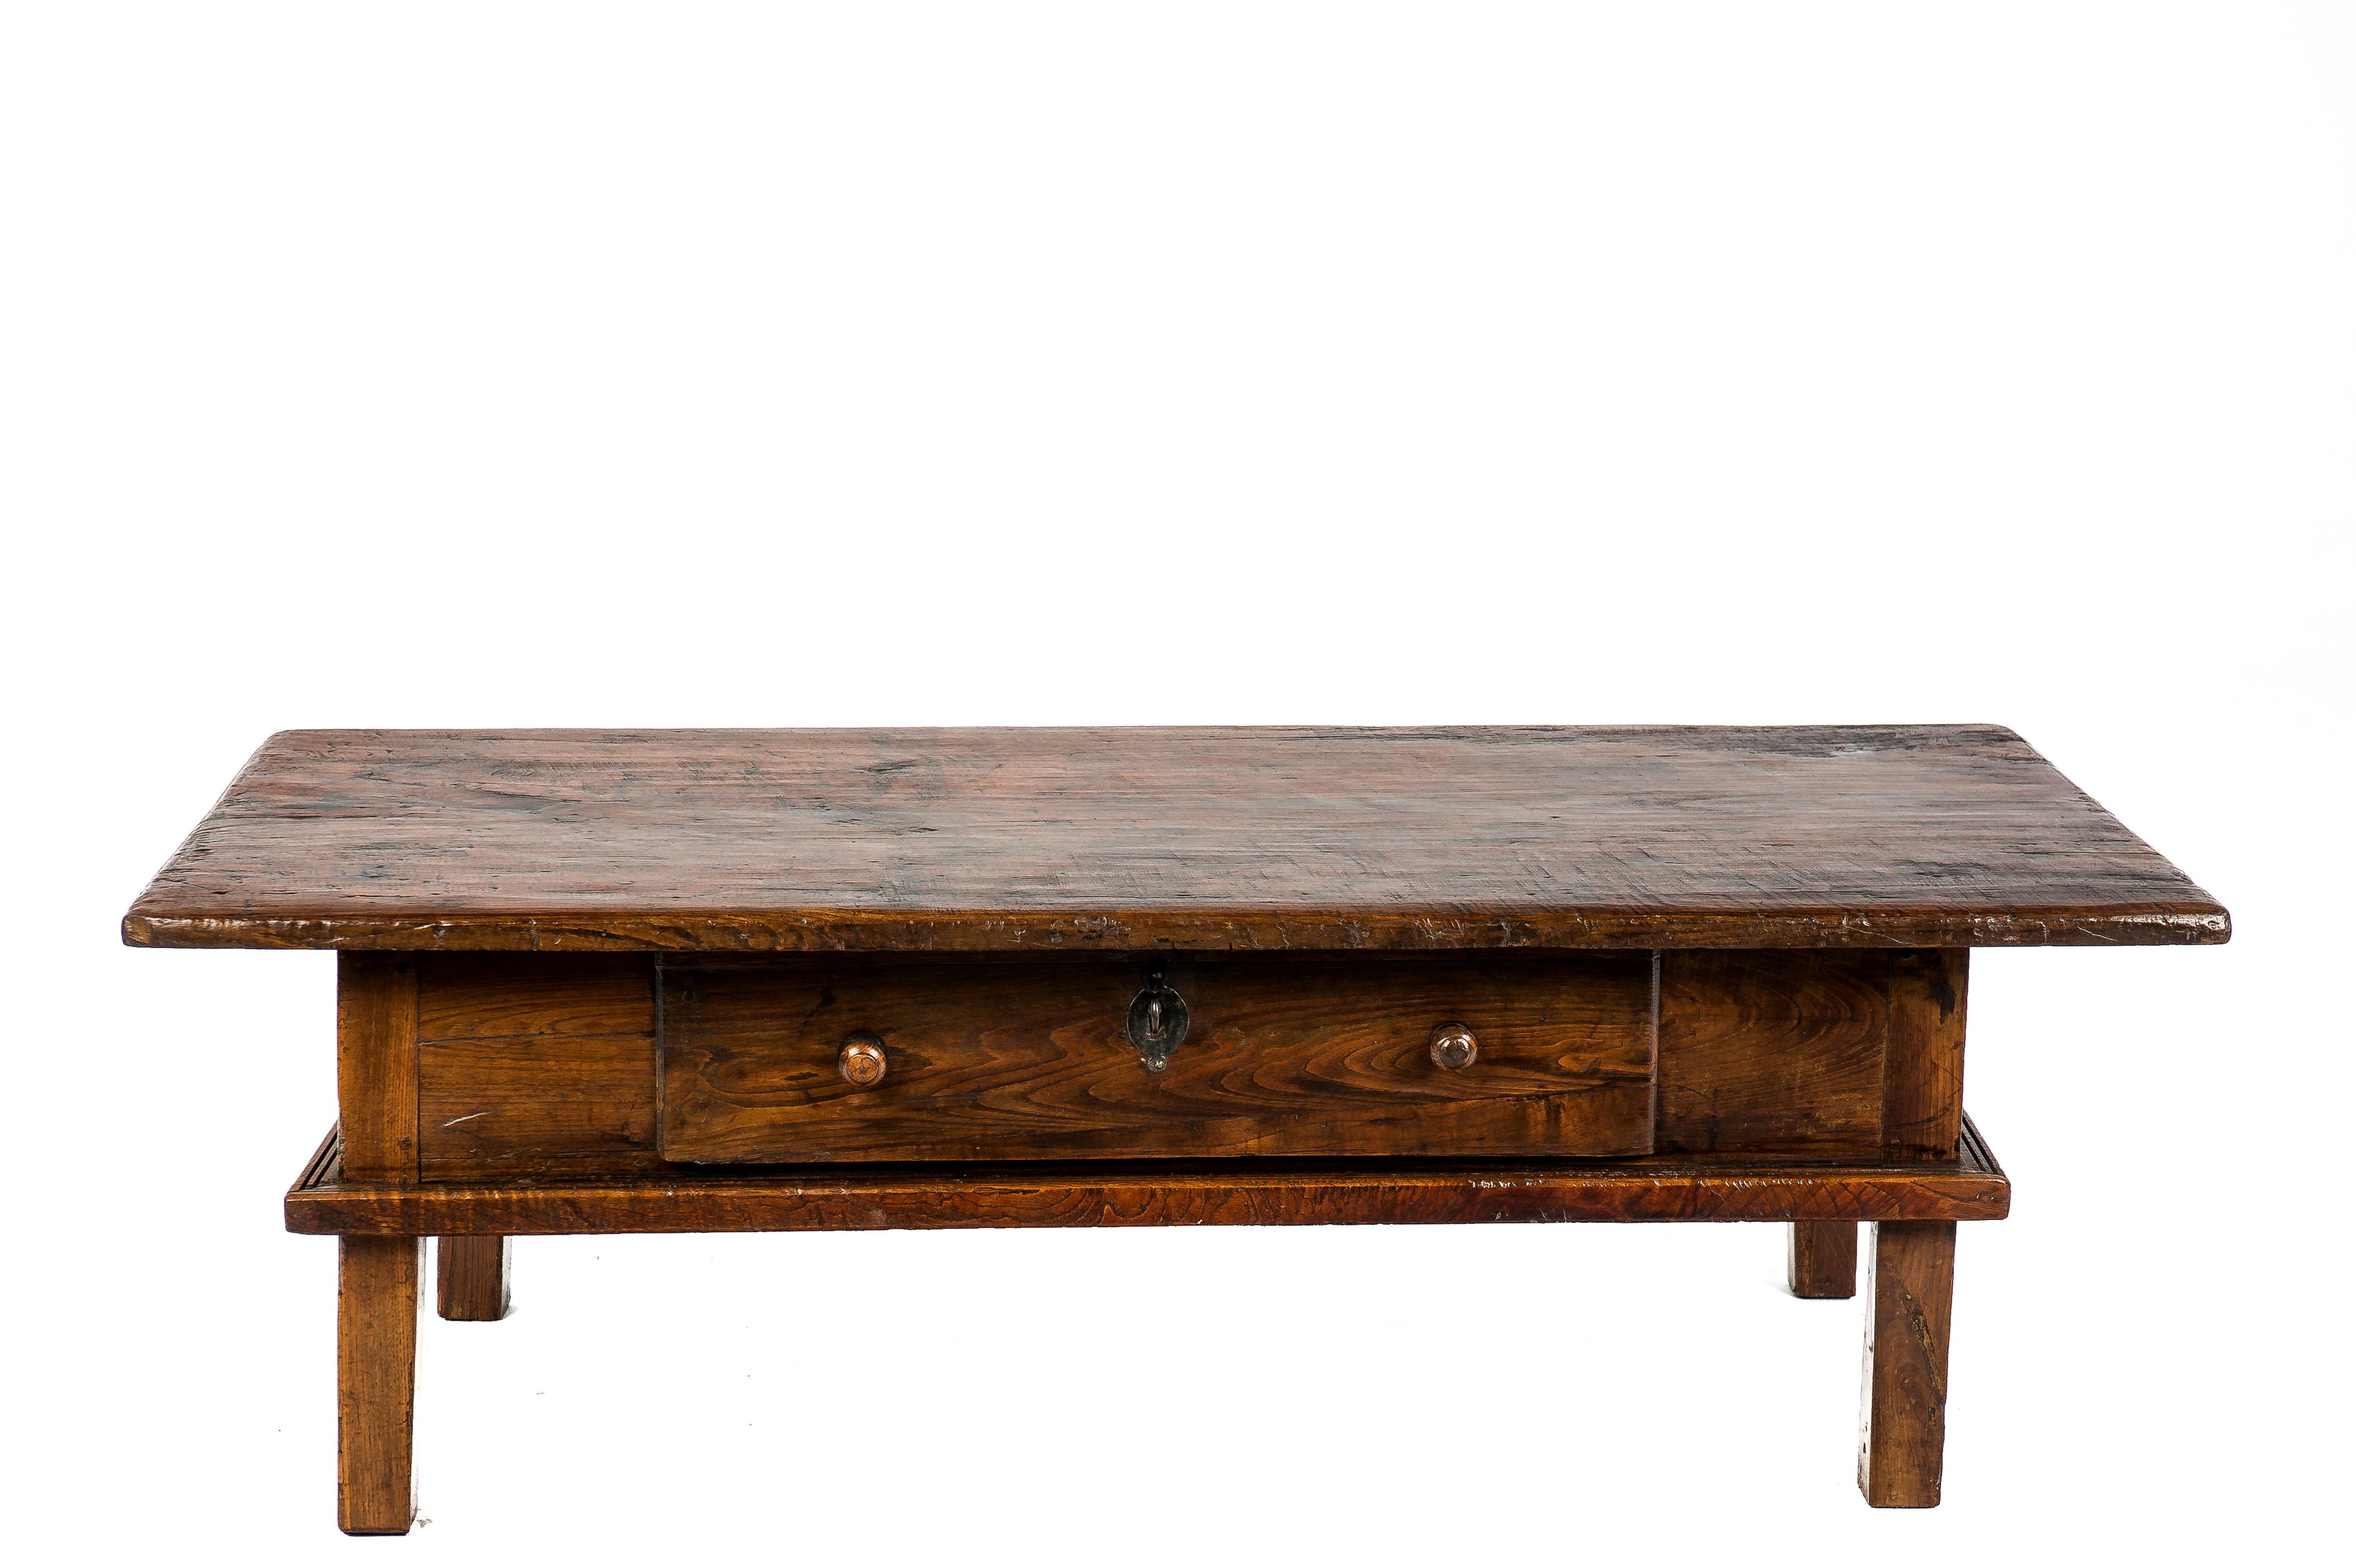 This beautiful warm brown color rustic coffee table or low table originates in Spain and dates circa 1820. The table has a great top that was made from a single board of solid chestnut wood 1,18 inches thick. The top has a beautiful grain pattern